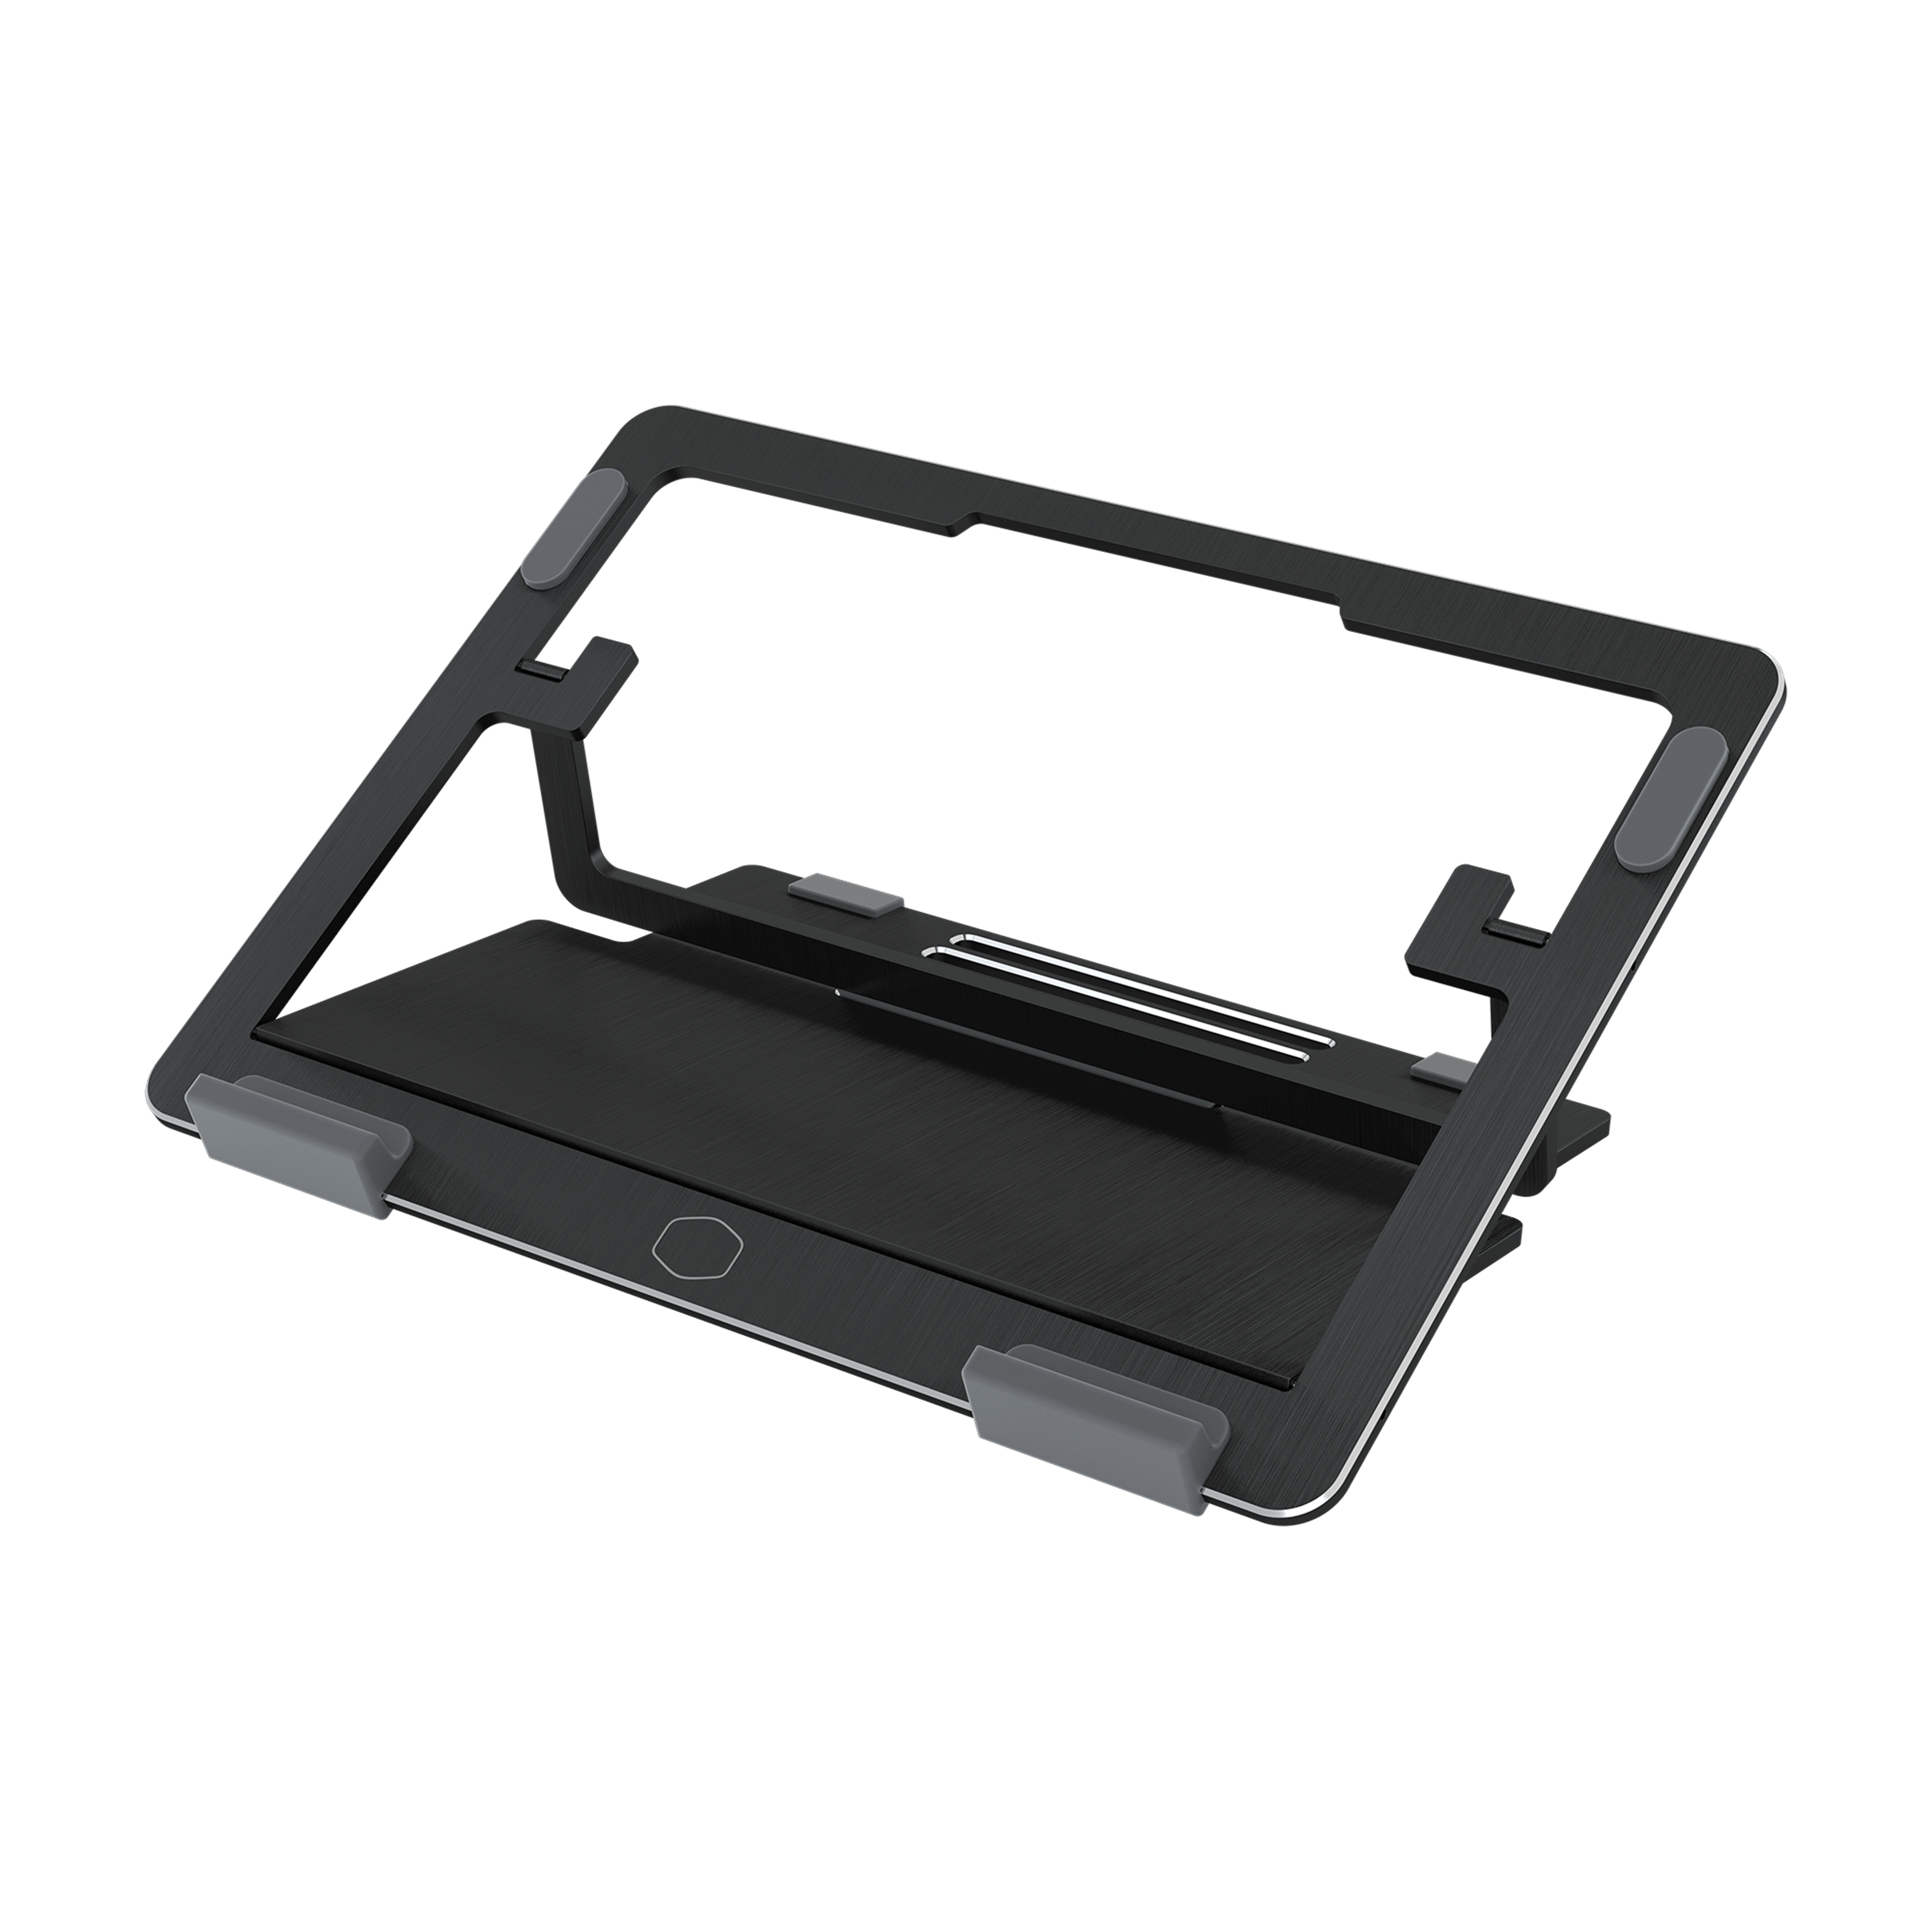 Cooler Master ErgoStand Air | Laptop Cooler and Stand